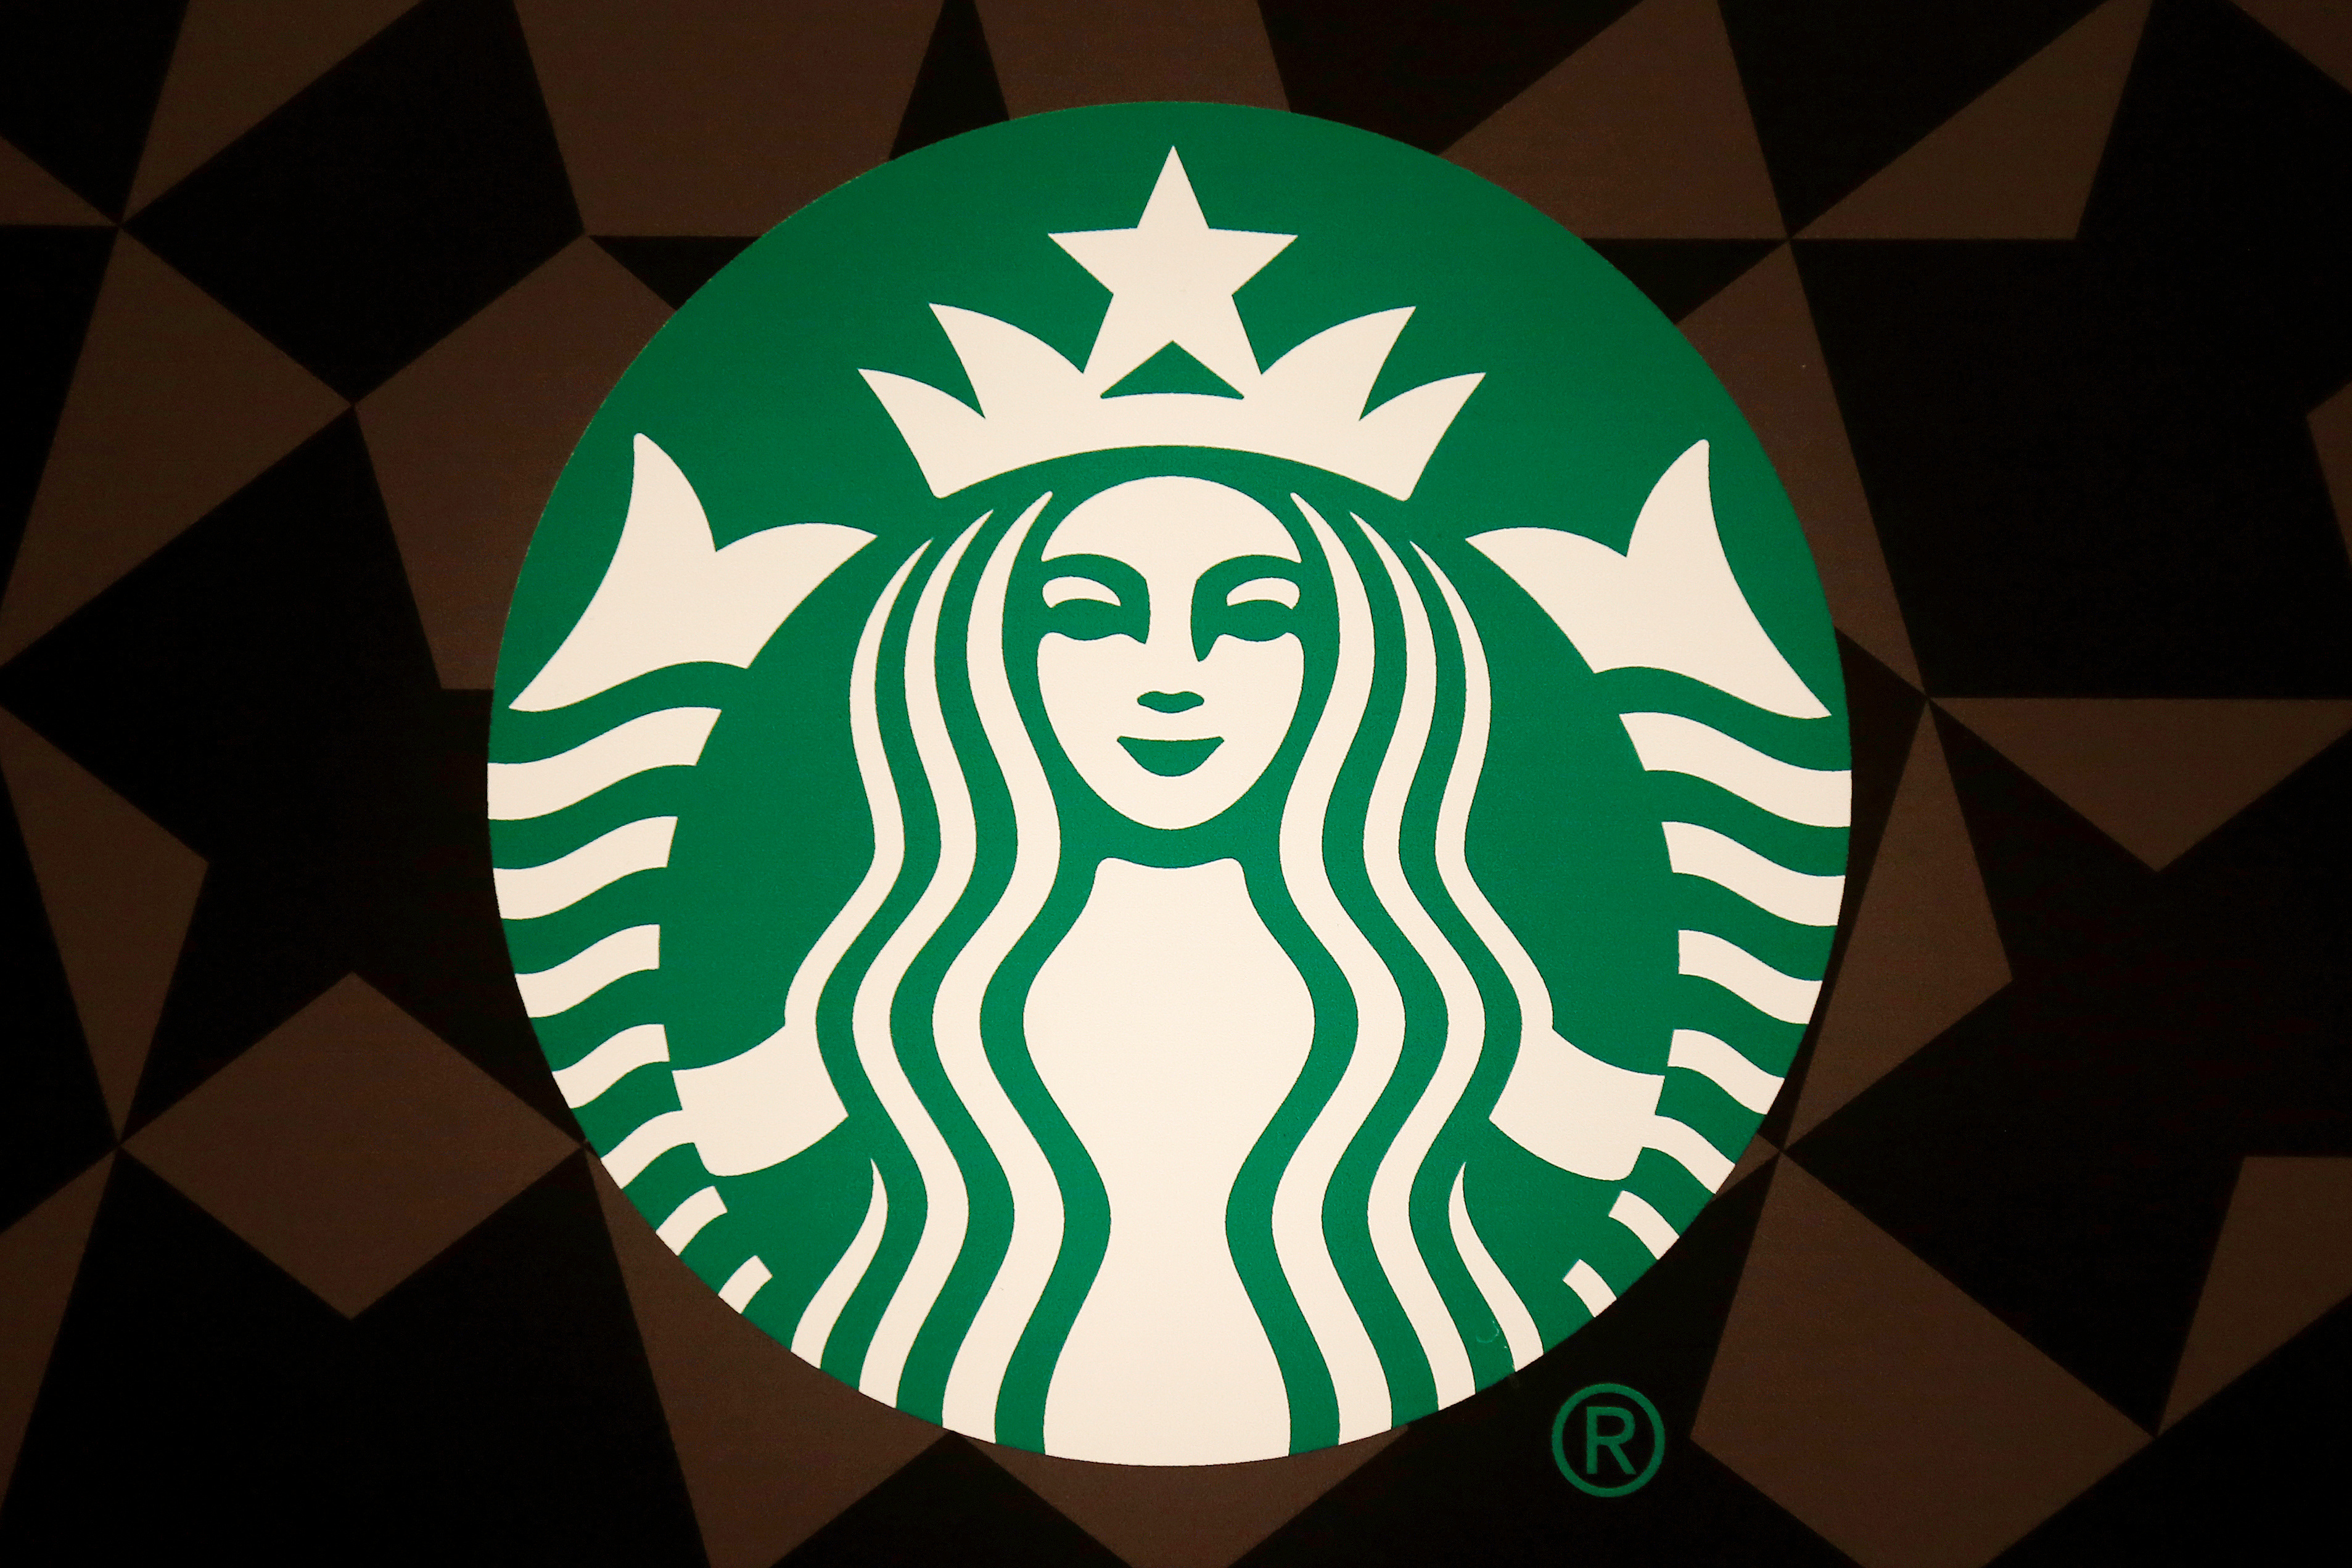 esgA Starbucks logo is pictured on the door of the Green Apron Delivery Service at the Empire State Building in New York